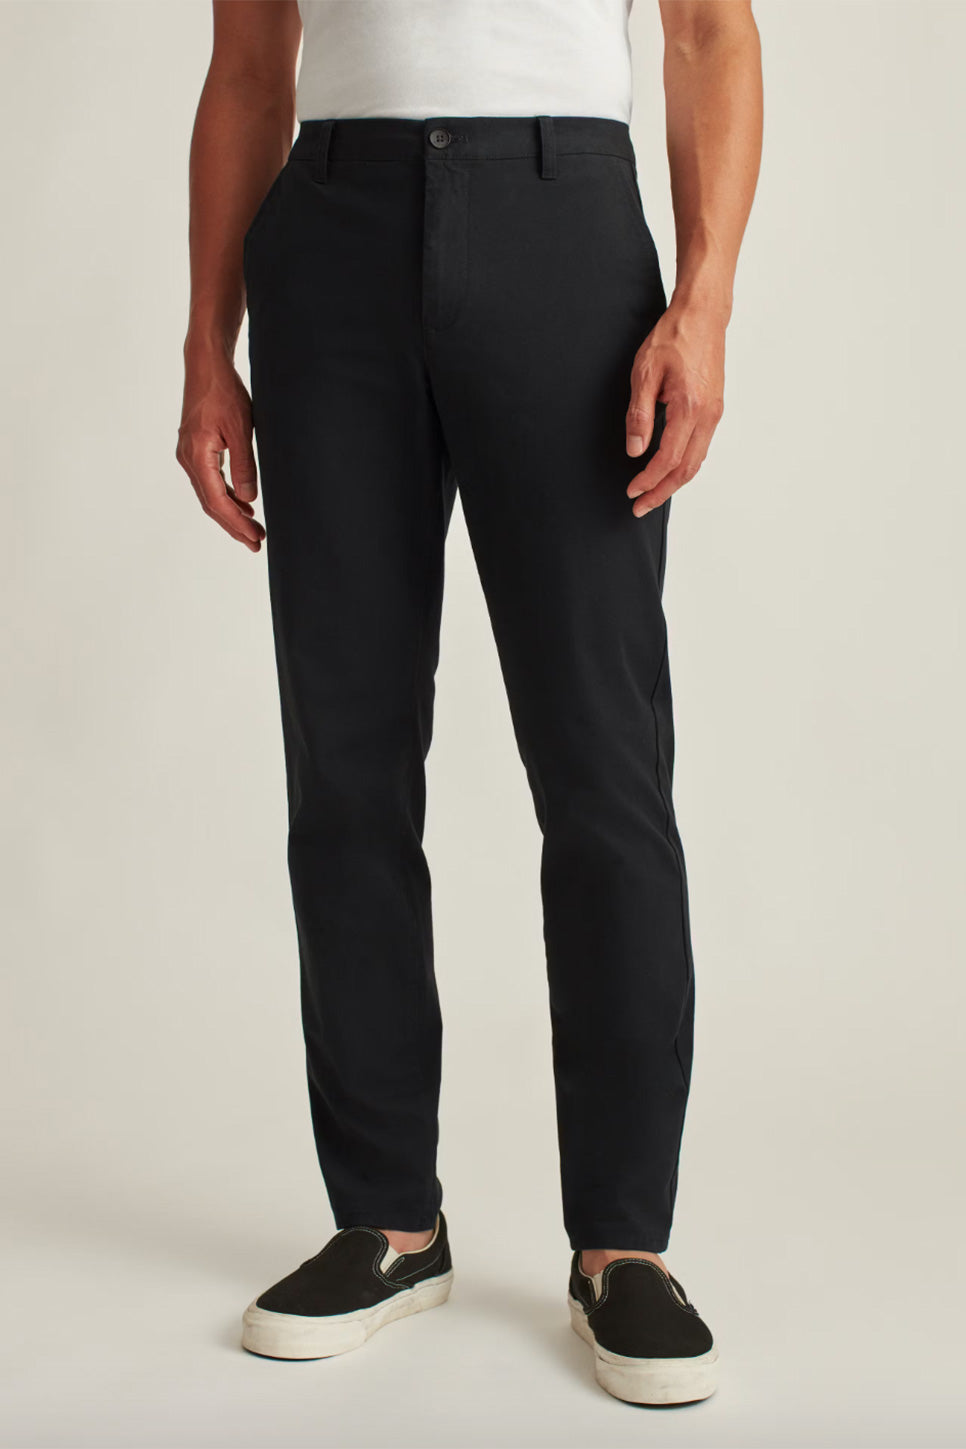 Bonobos - Stretch Washed Chino 2.0 - Black - Front